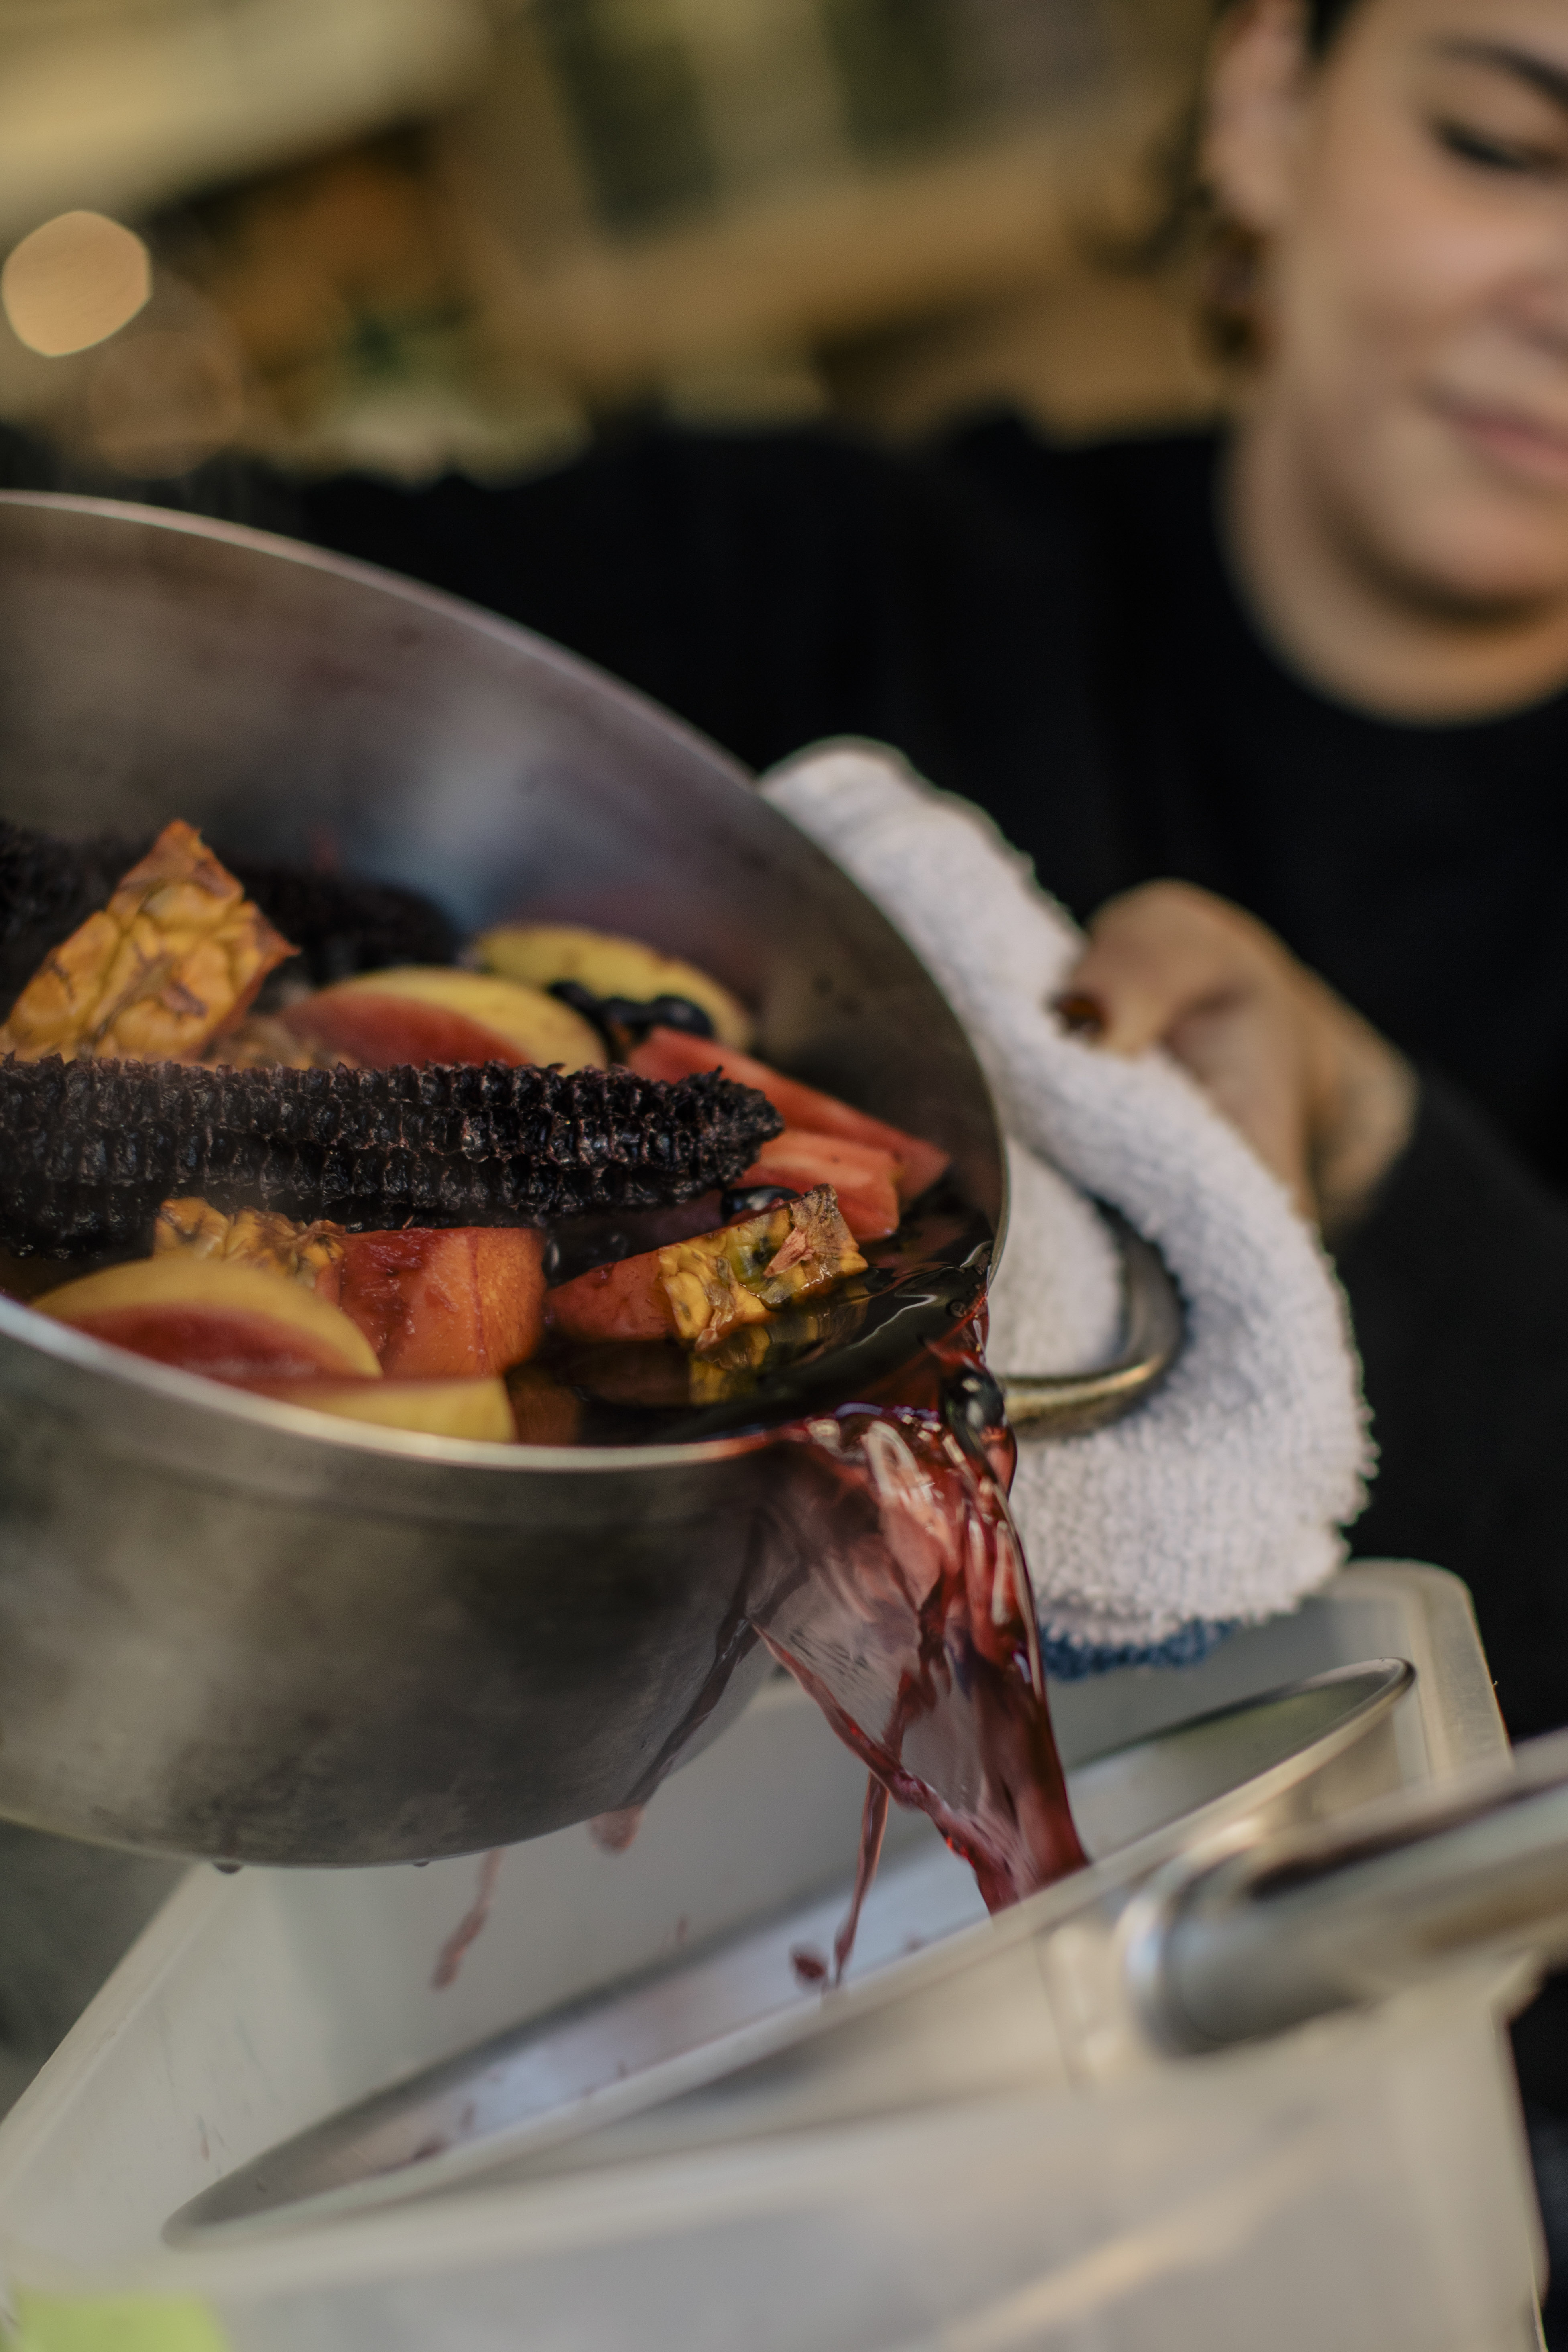 At the Llama Inn restaurant in Brooklyn, the chicha morada is strained after simmering and then chilled overnight with all the ingredients.